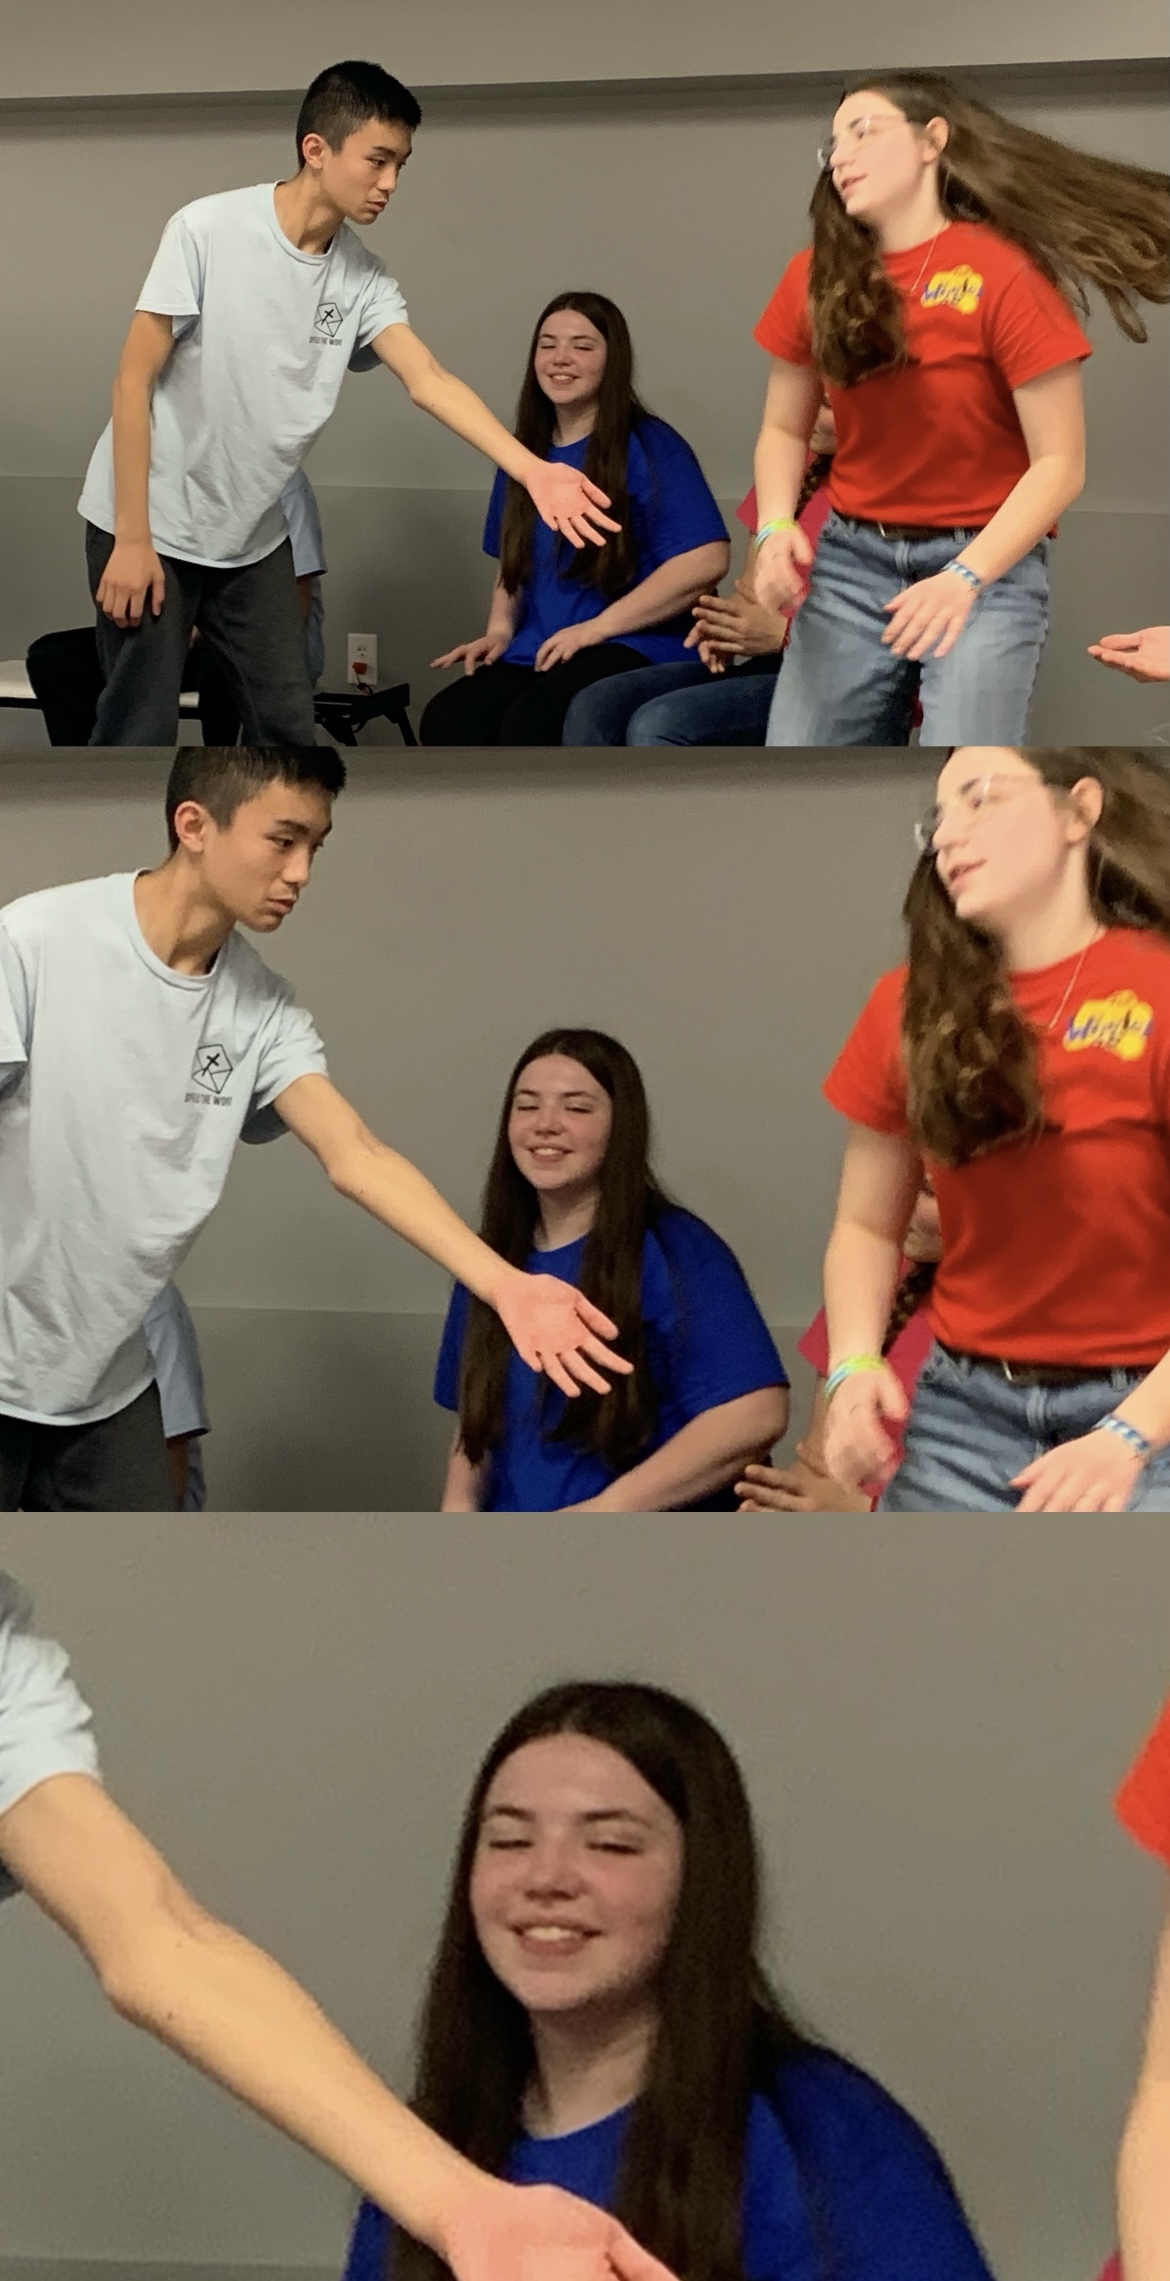 Girl ignores boy, other girl laughs Blank Meme Template